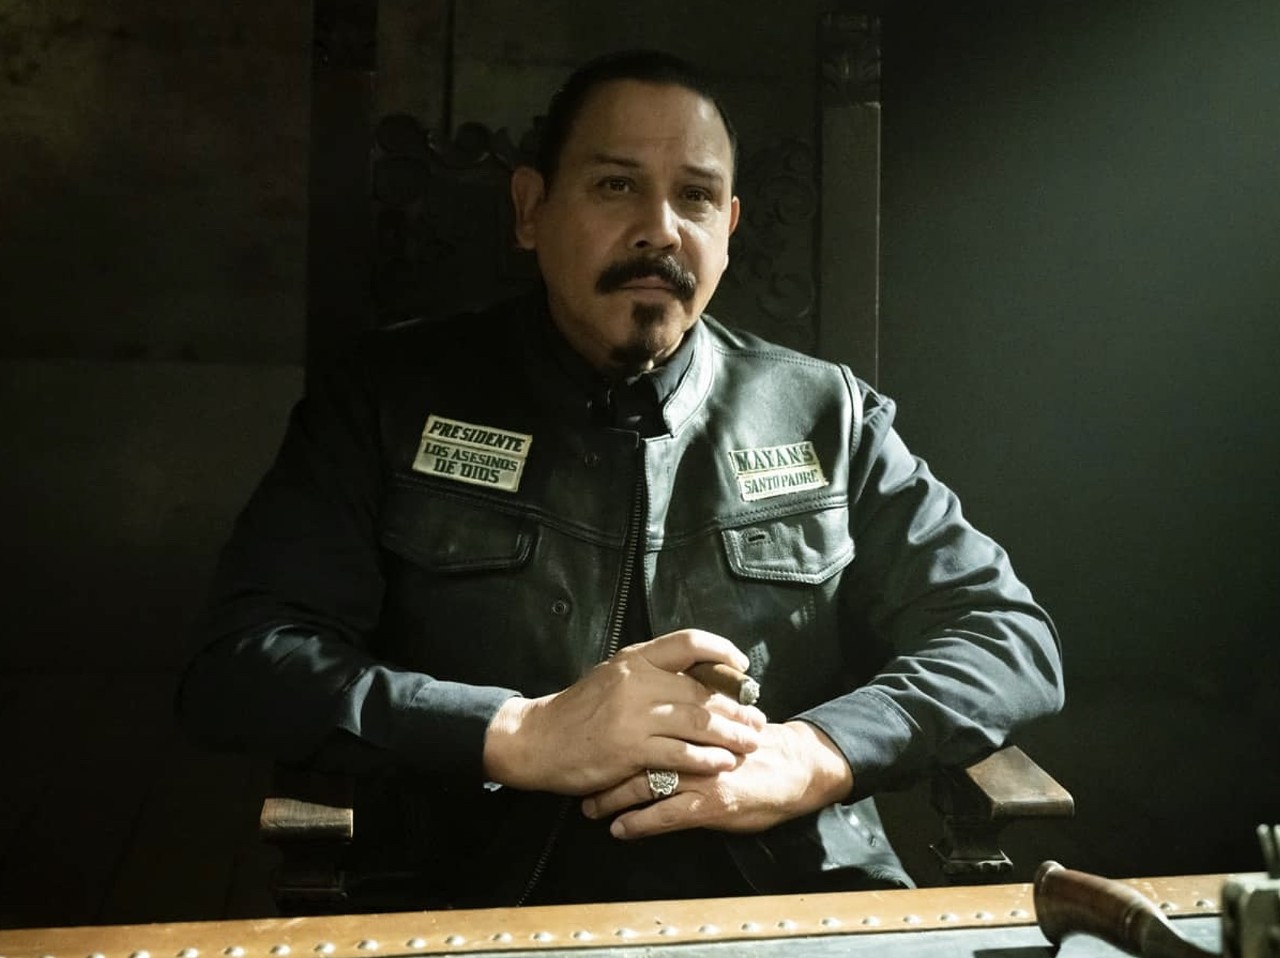 Emilio Rivera
It's not often that an actor gets to play the same role on multiple TV shows, but that's just what Emilio Rivera did as Marcus Alvarez on AMC's Sons of Anarchy and its spinoff Mayans M.C. Born in San Antonio in 1961, Rivera grew up on the outskirts of L.A. and launched his acting career in the '90s. He also starred in Eva Longoria’s film Flamin’ Hot, which tells the alleged origin story of the beloved local snack.